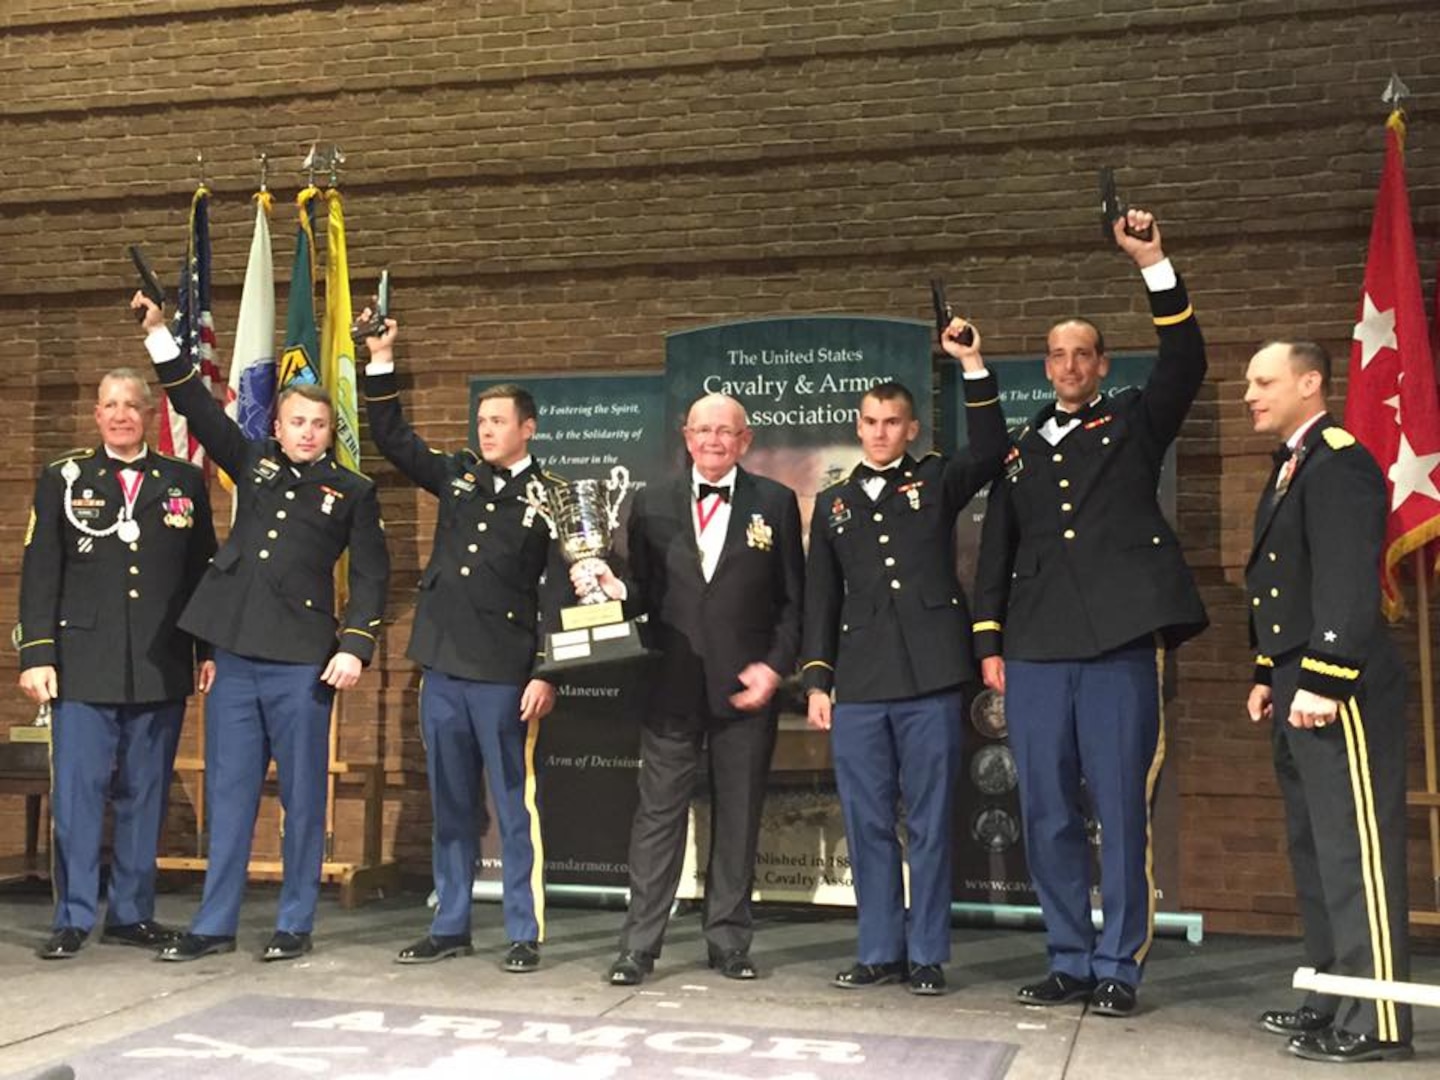 The crew from the North Carolina Army Guard's C Company, 1st Battalion, 252nd Armor Regiment have been named the Army's best tank crew and have won the Sullivan Cup.